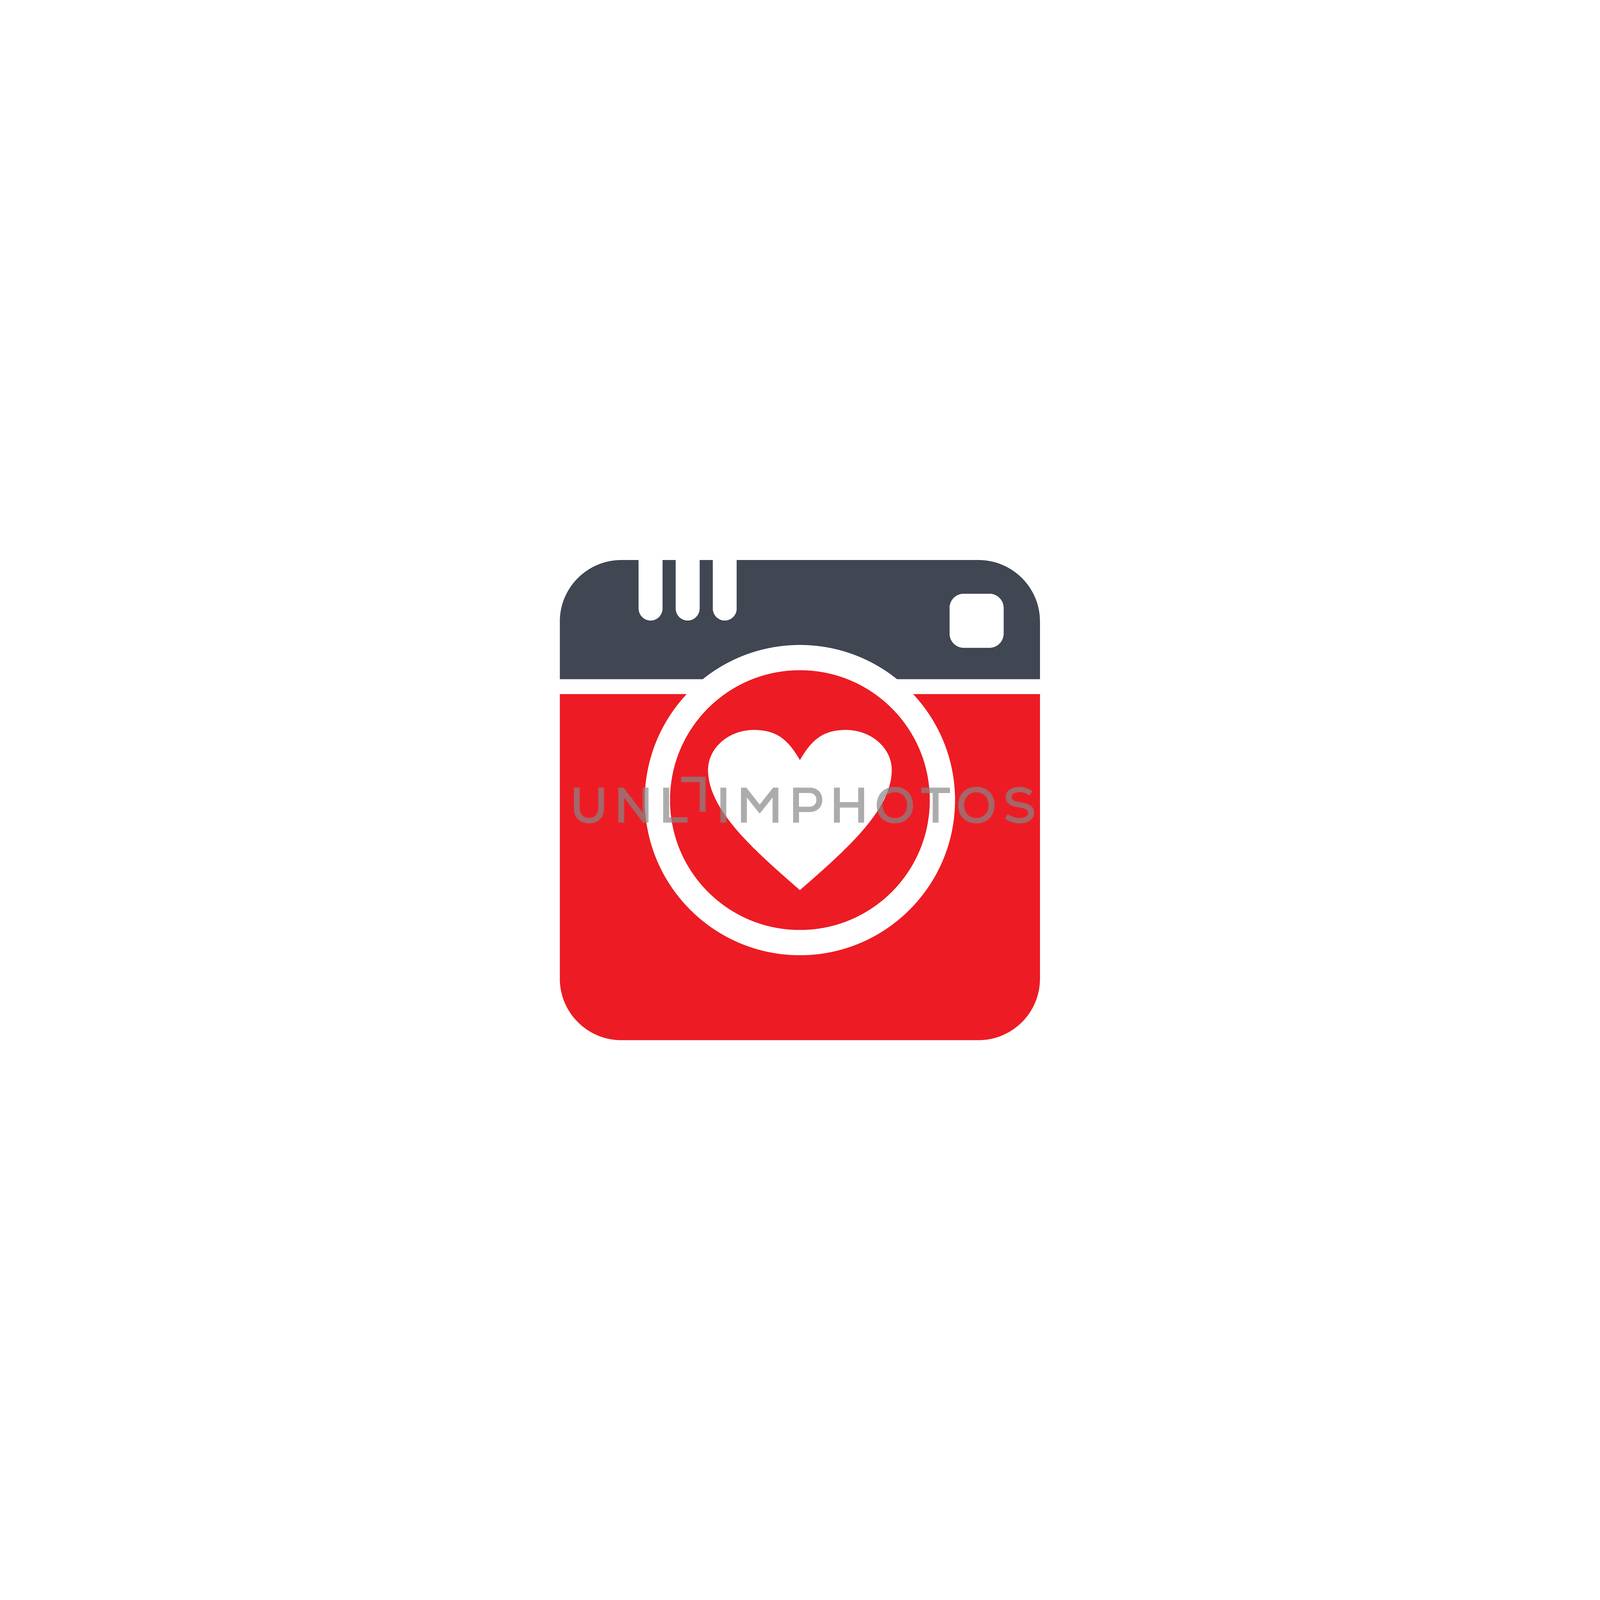 photography theme logotype by vector1st